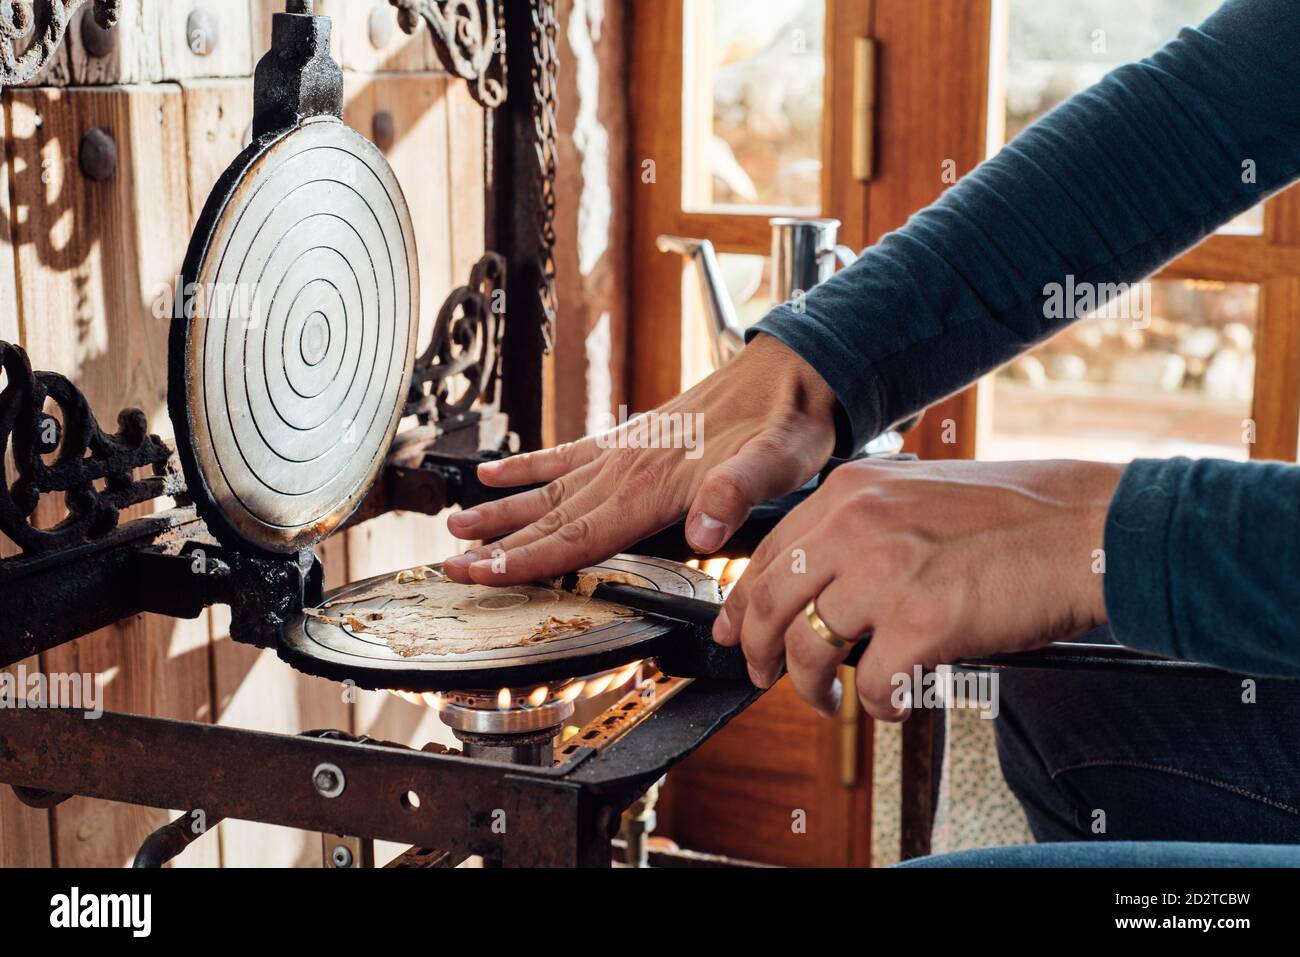 Cropped unrecognizable artisan using stick while rolling up hot freshly baked Catalan neula waffles on waffle iron placed over gas flame Stock Photo